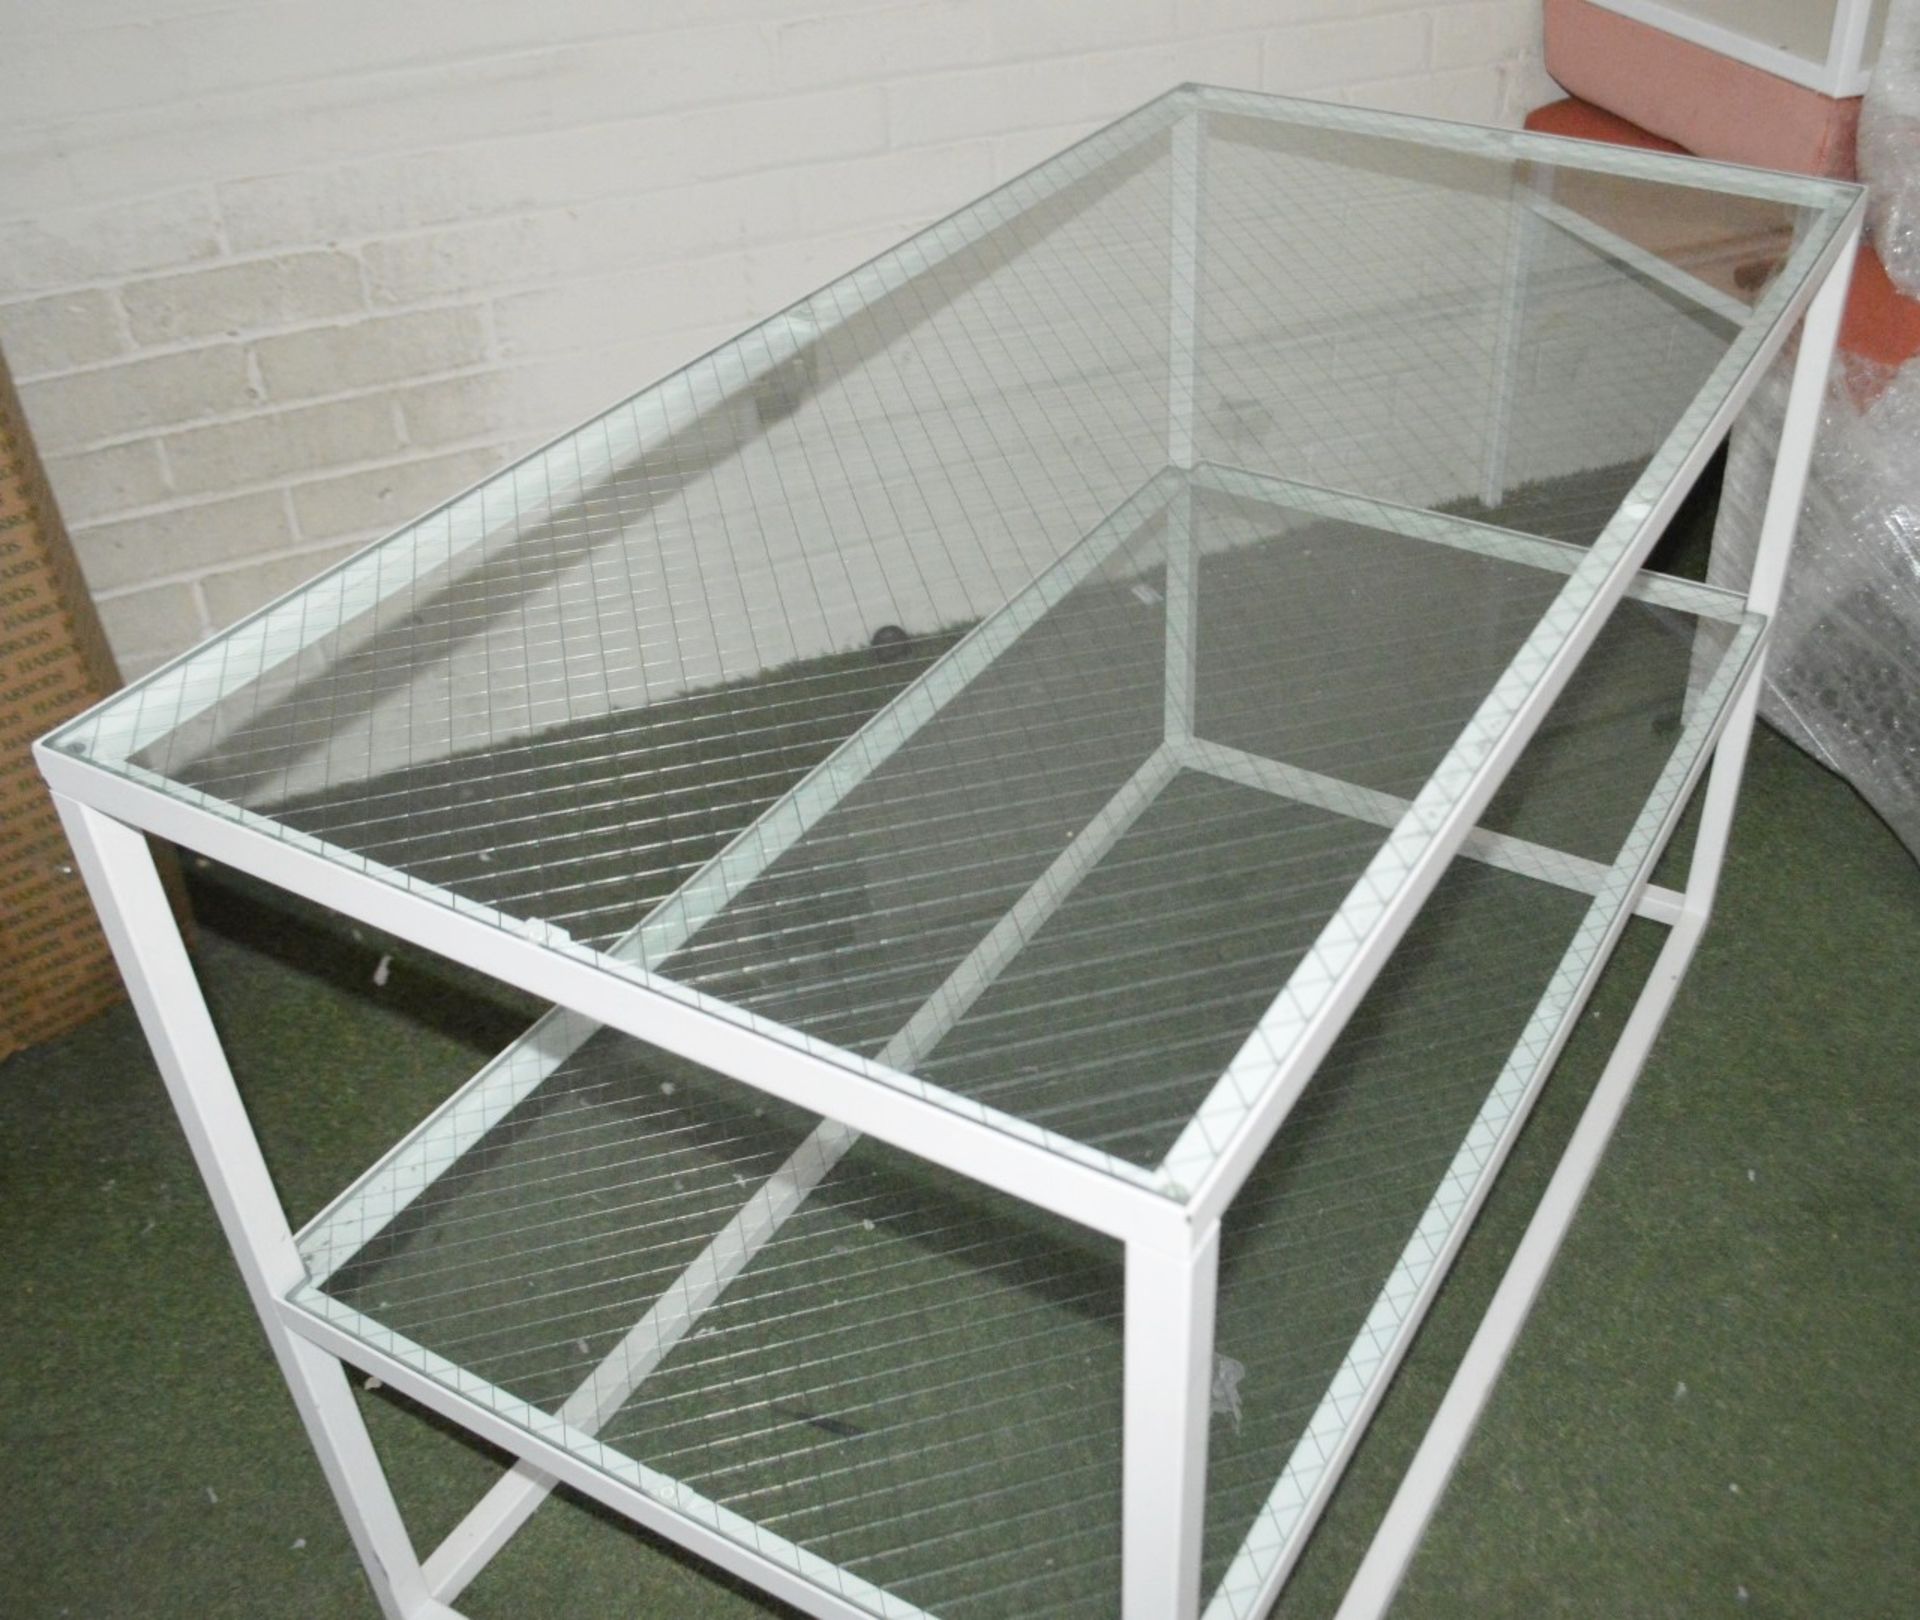 1 x 2-Tier Rectangular Metal Shop Display Unit With Glass Shelves In White - Dimensions: H75 x - Image 4 of 4